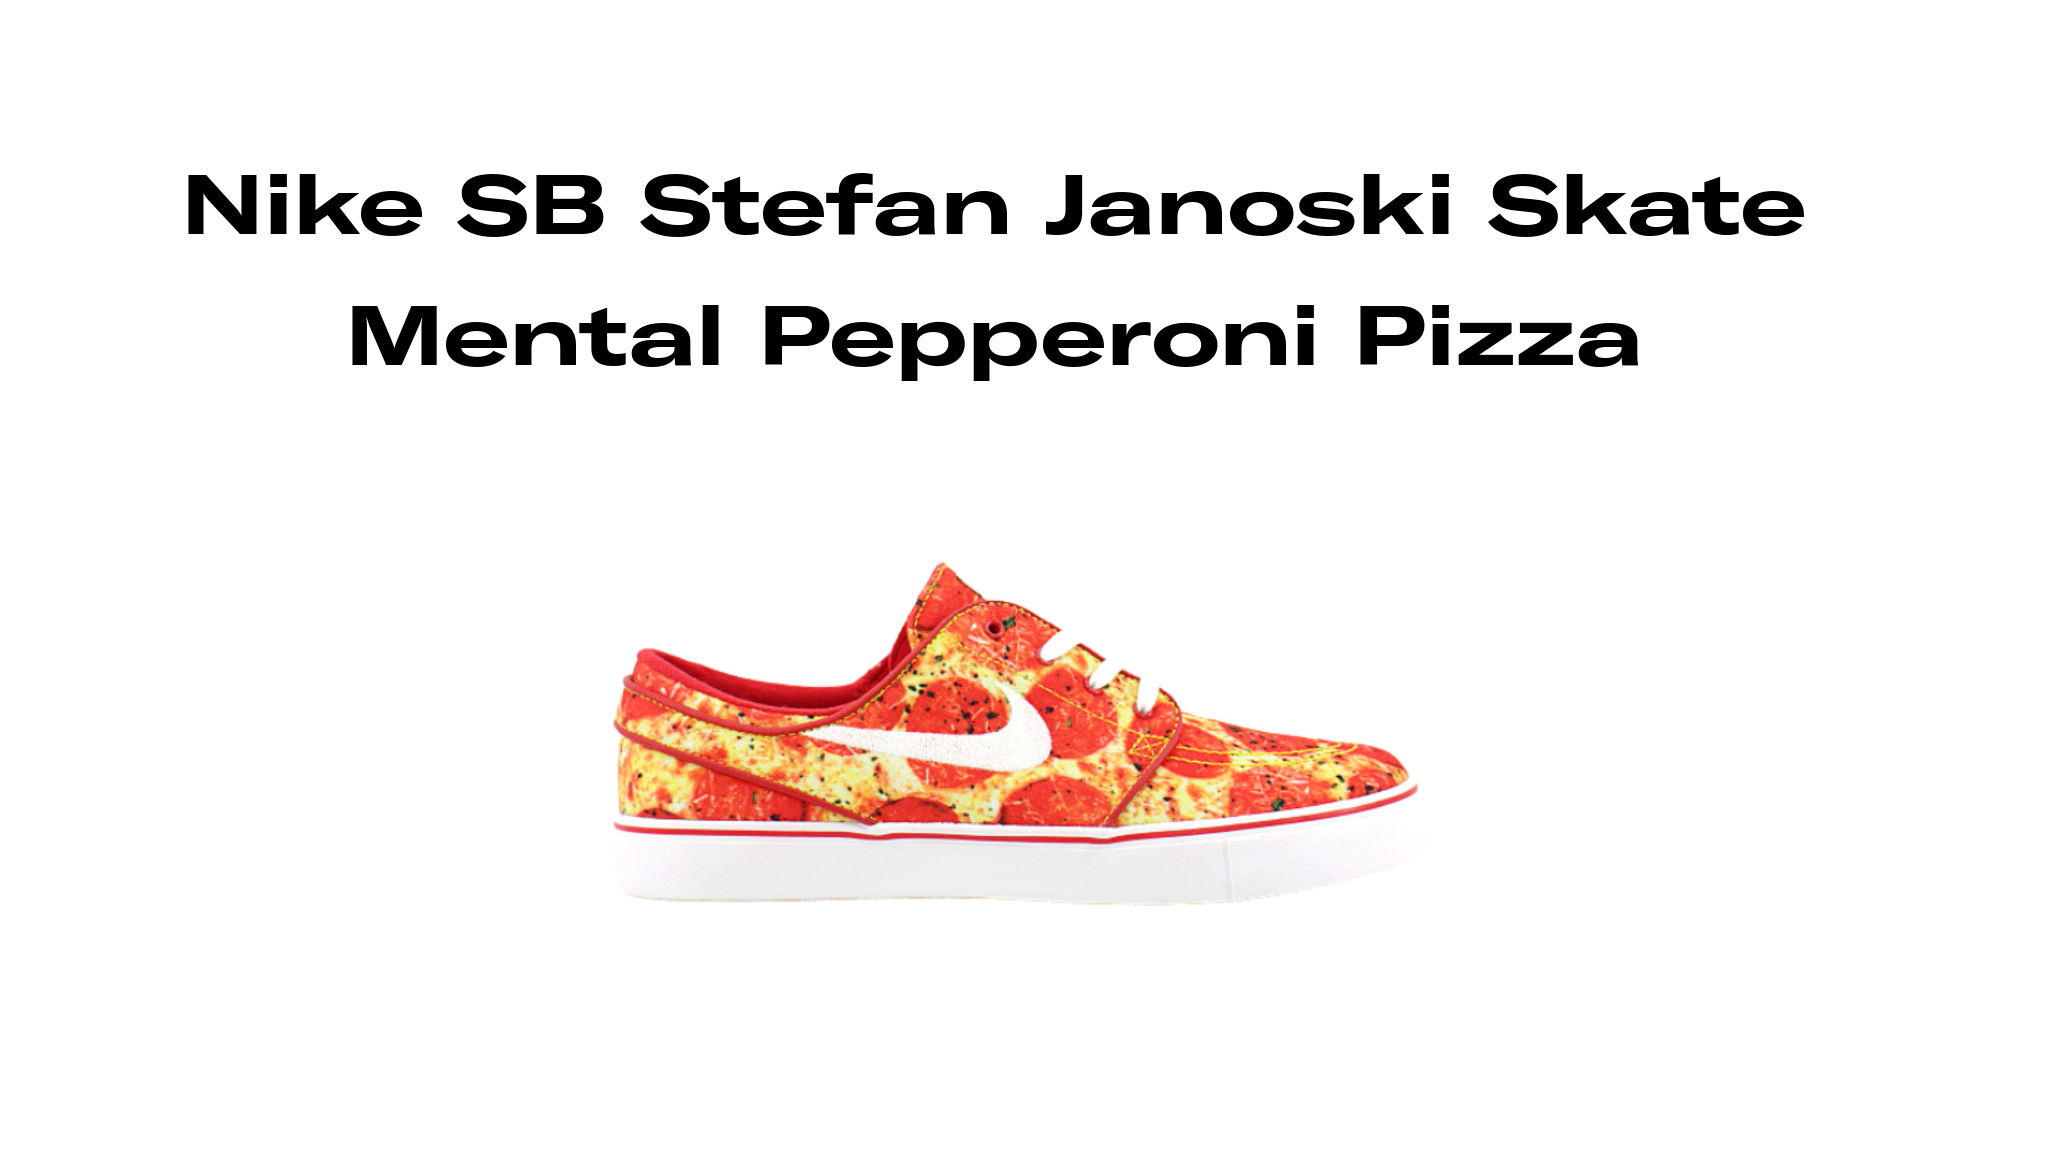 Stefan Janoski Skate Pizza Release Date, Raffles, and Where to Buy